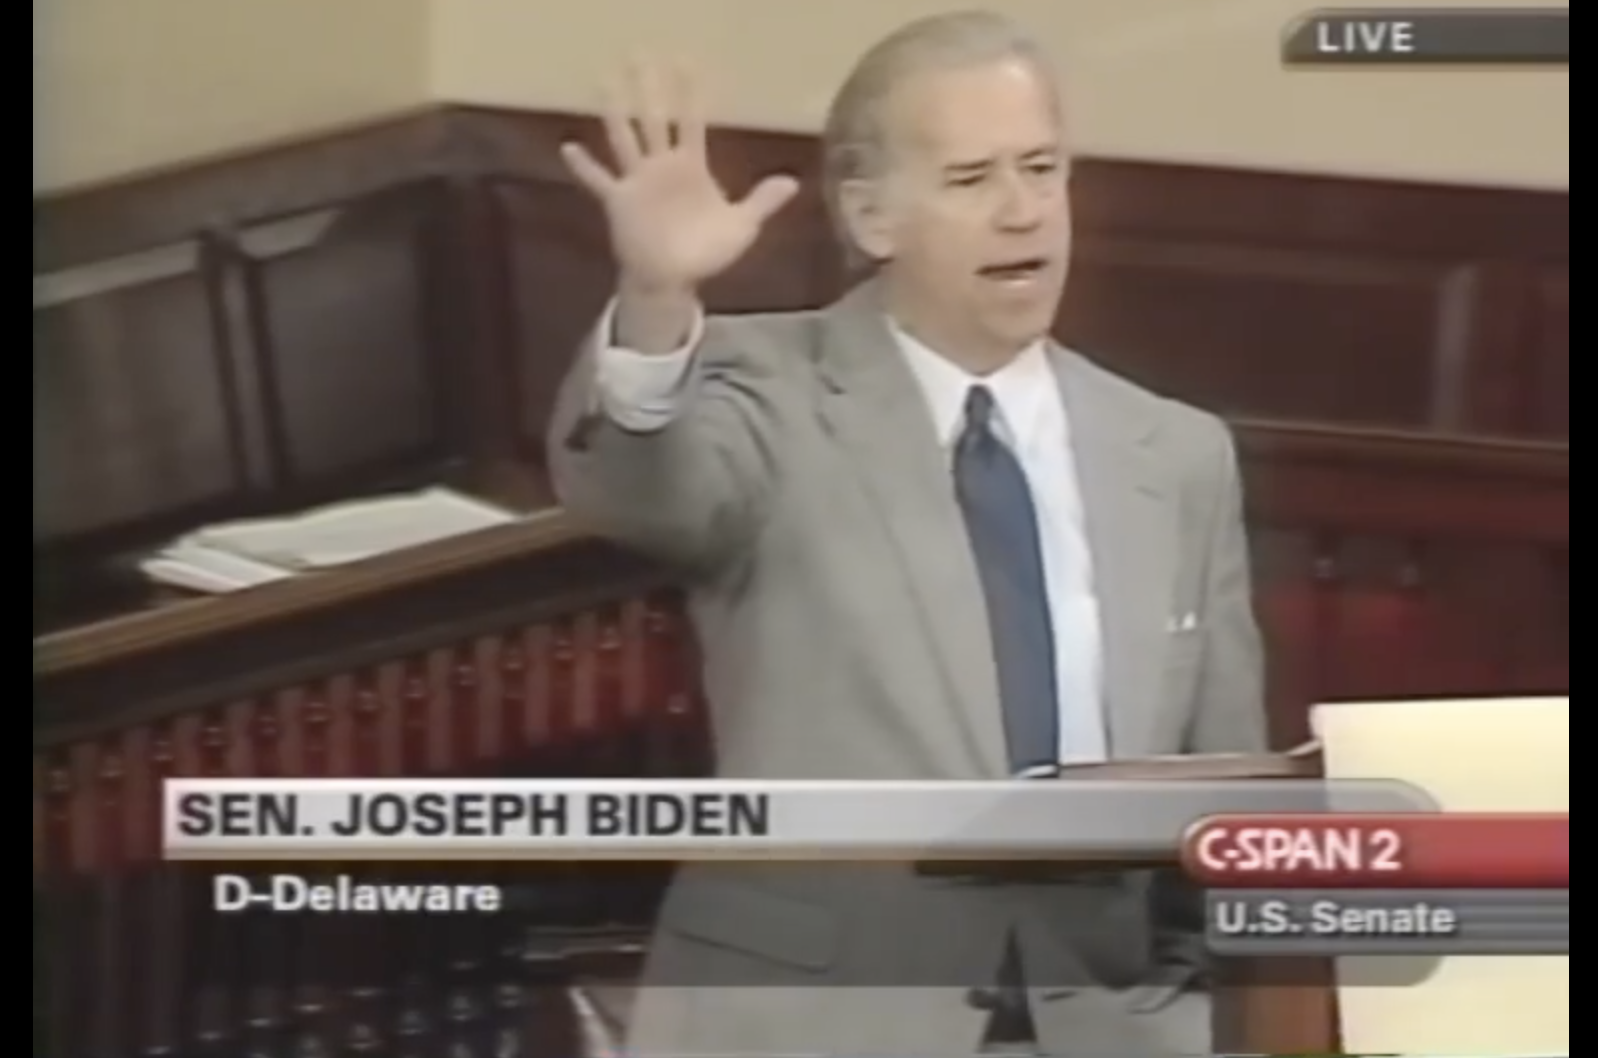 Biden created the student debt crisis he claims to solve